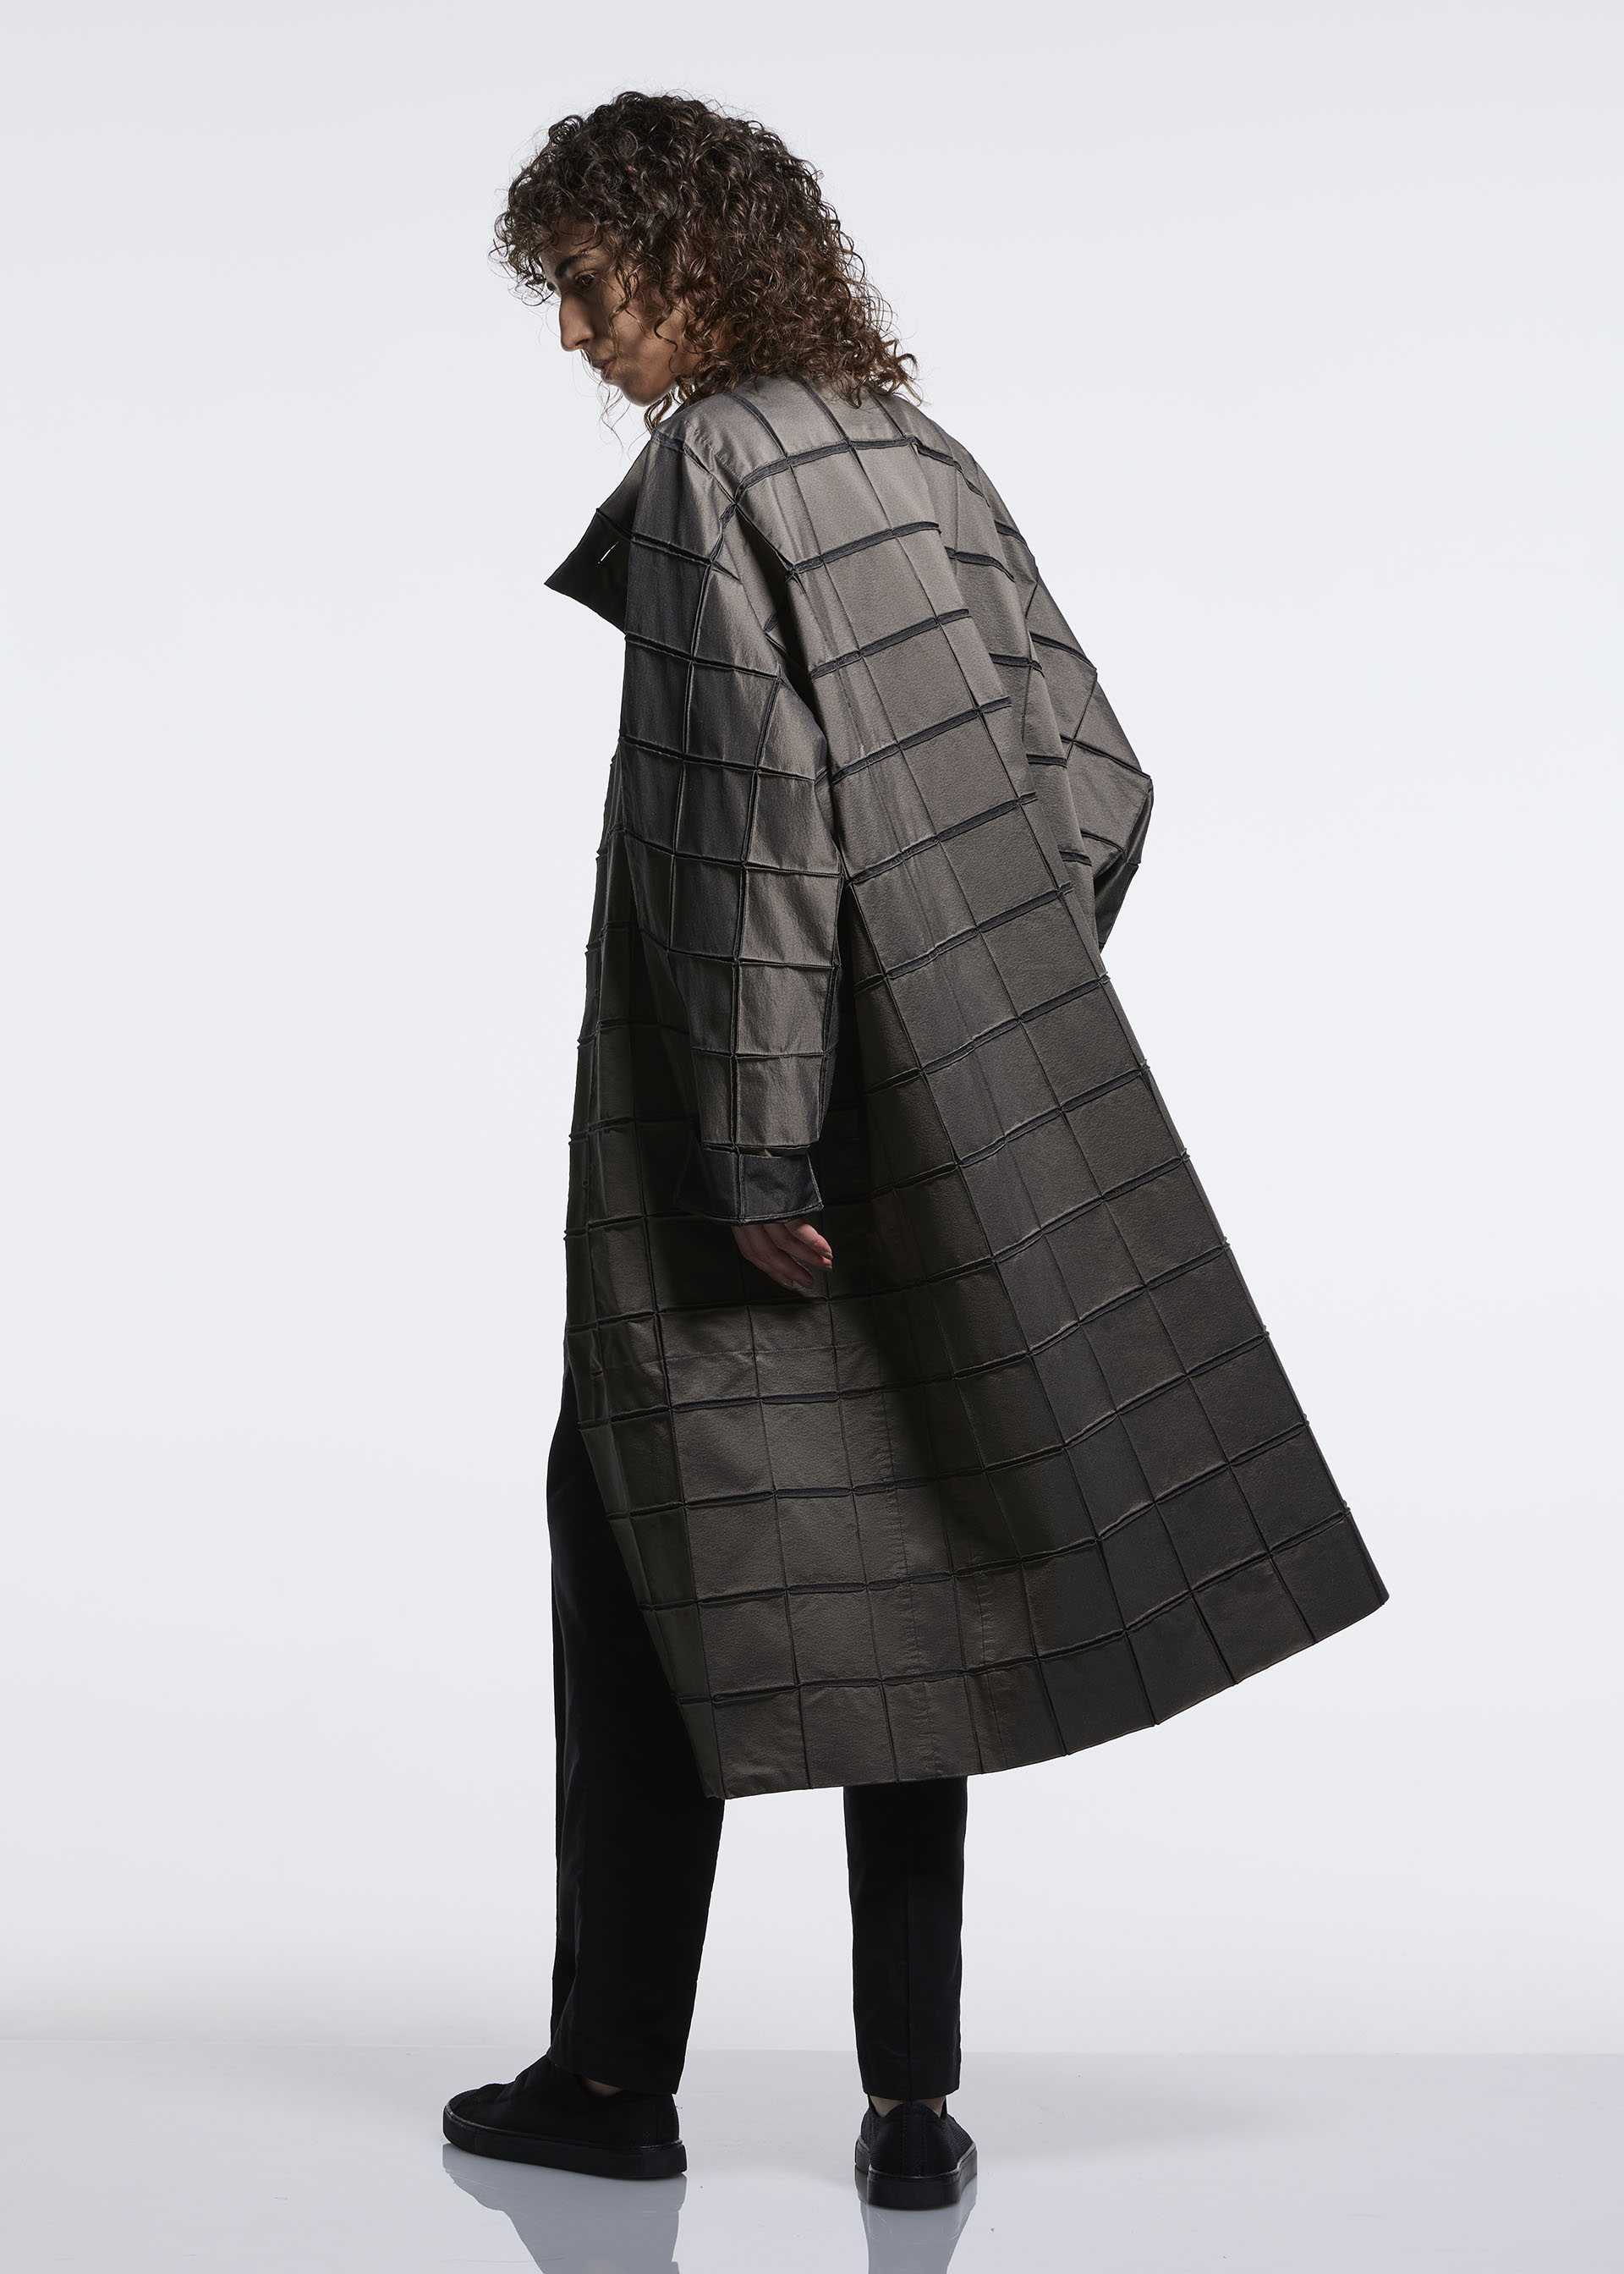 Issey Miyake A-POC Able Collection